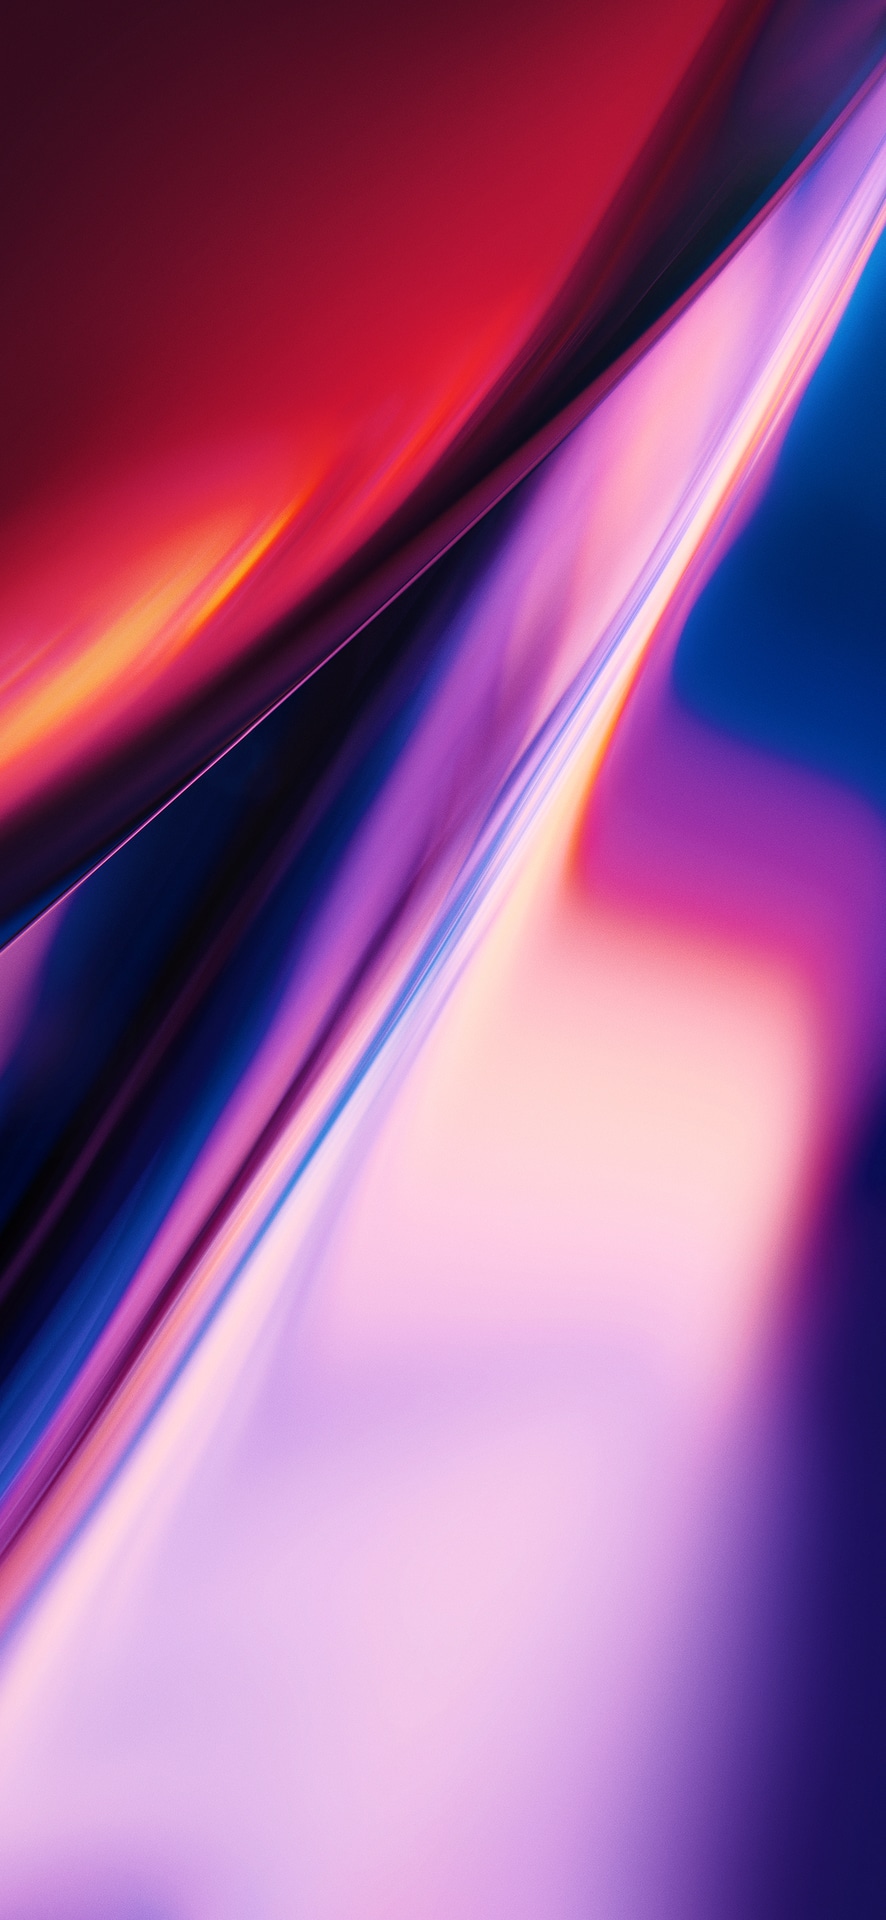 Wallpaper from the OnePlus 7 Pro 7